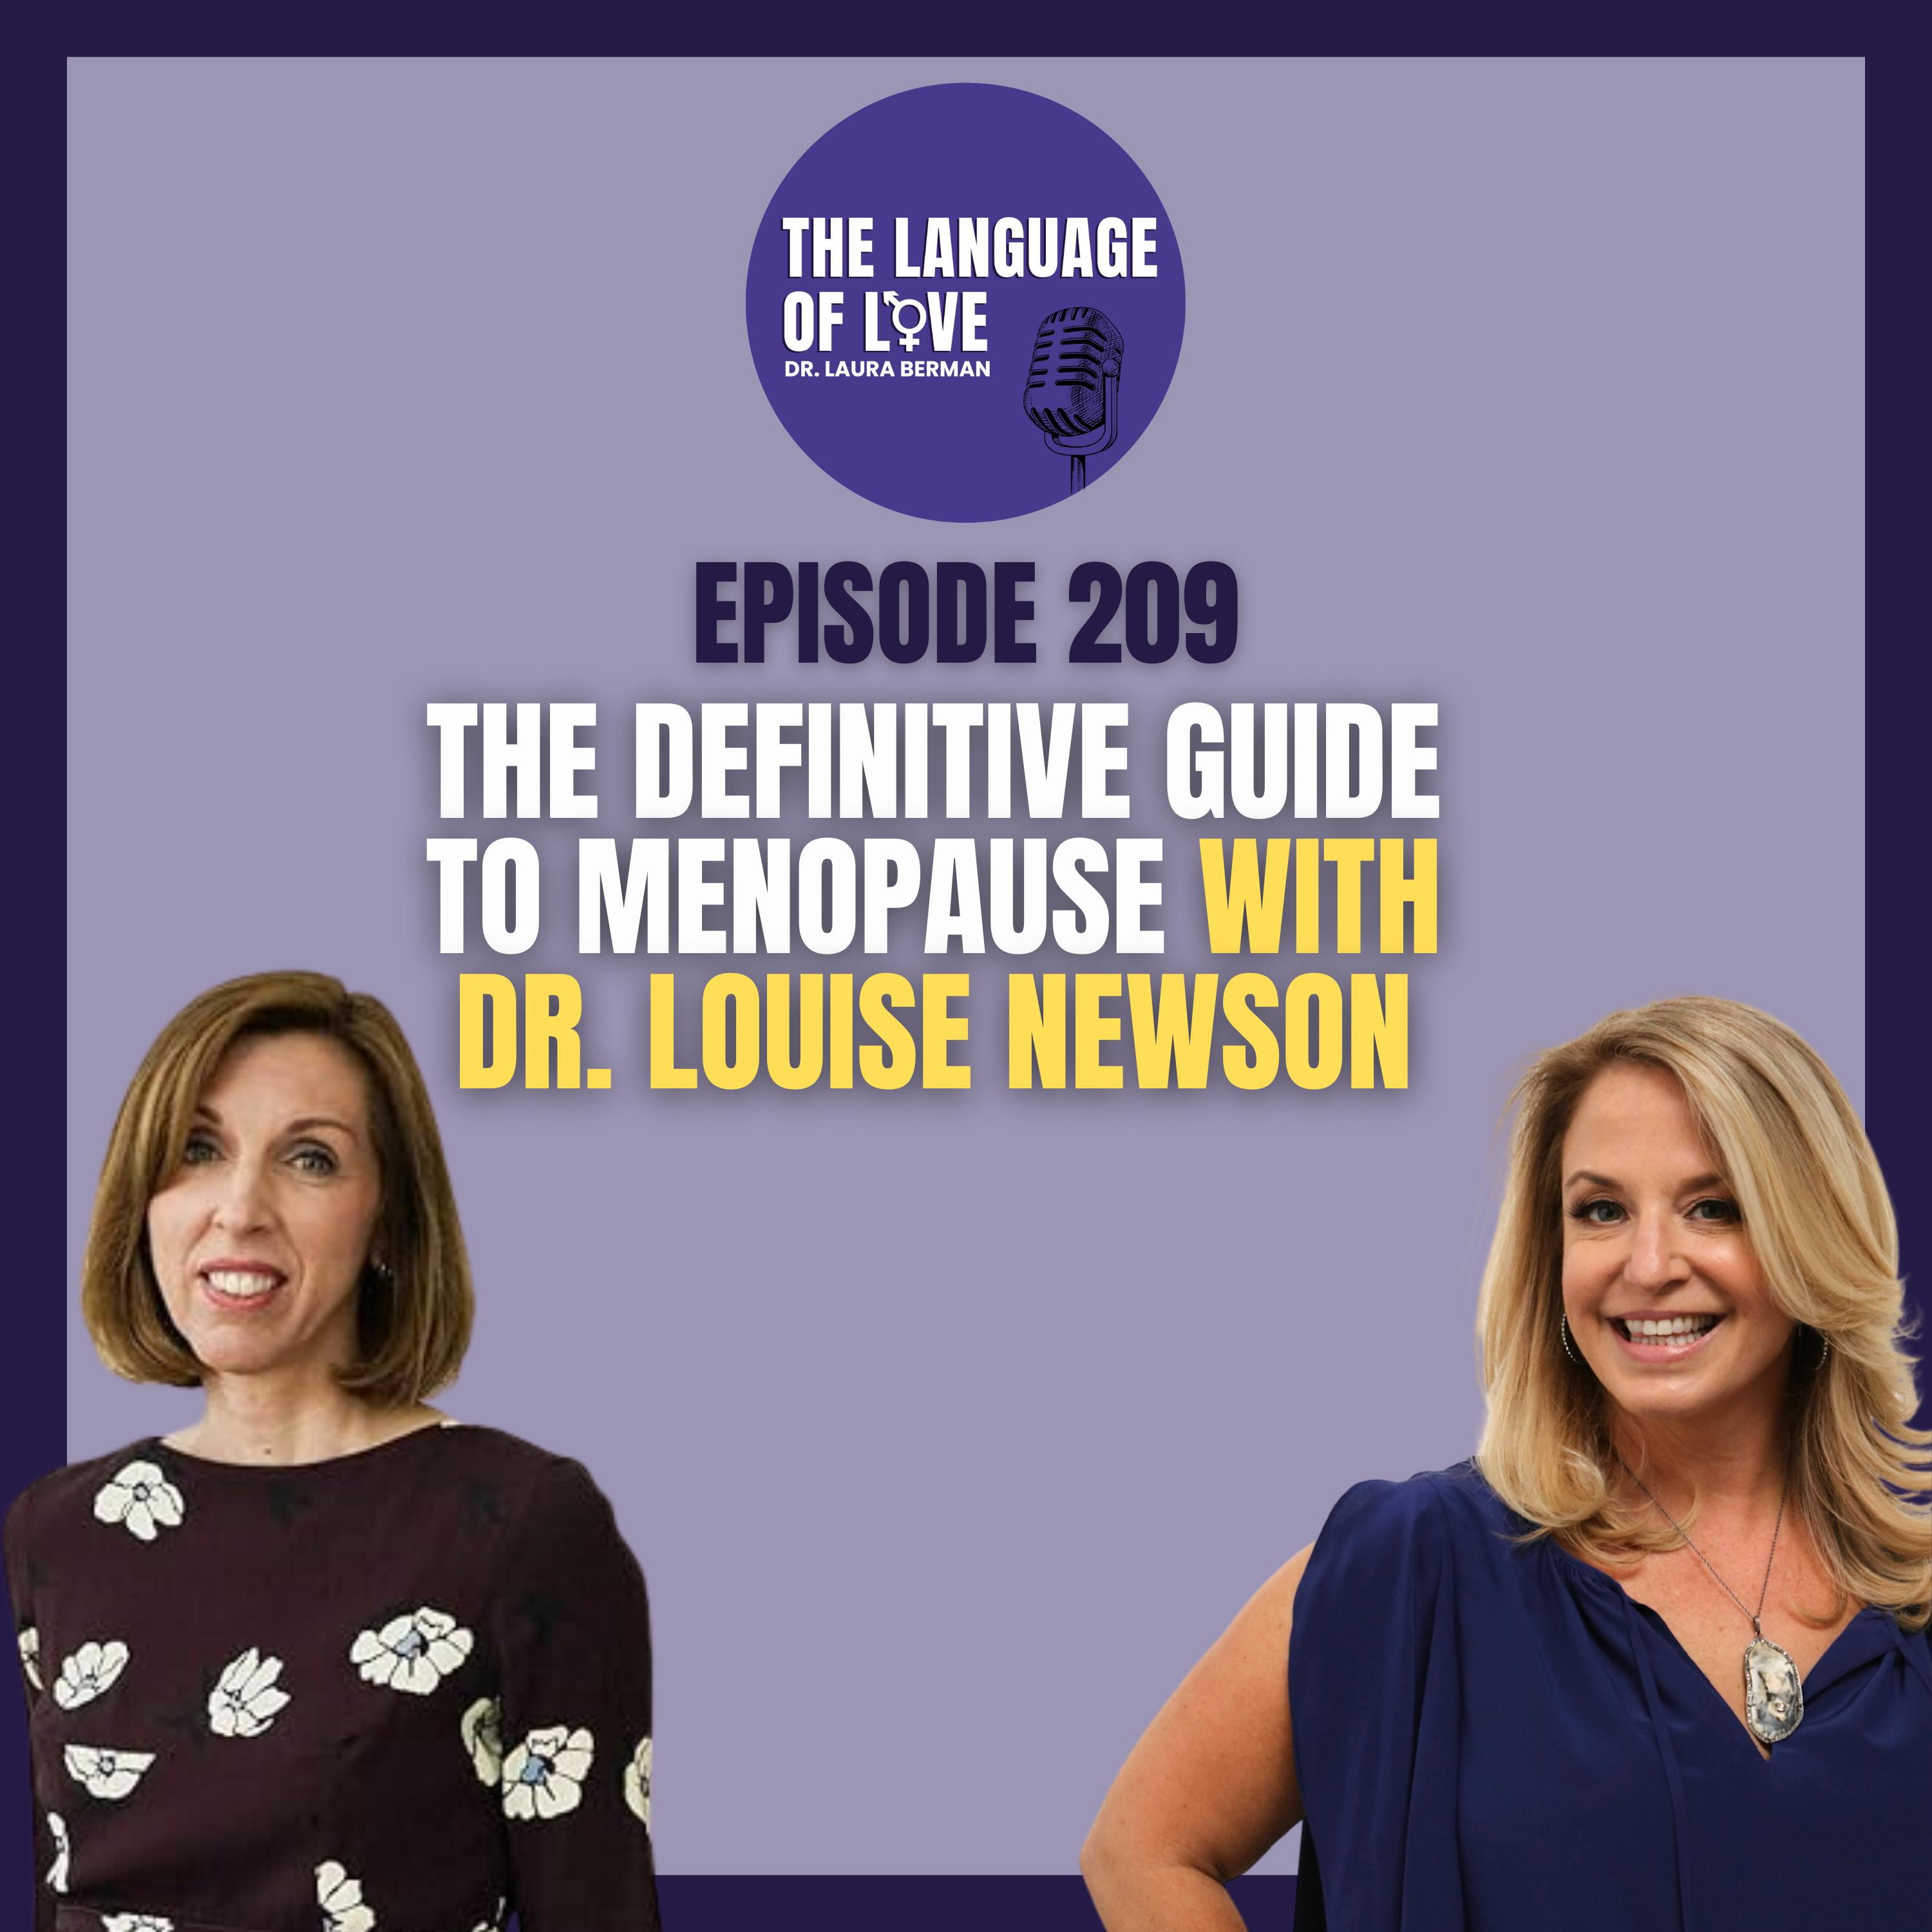 The Definitive Guide to Menopause with Dr Louise Newson